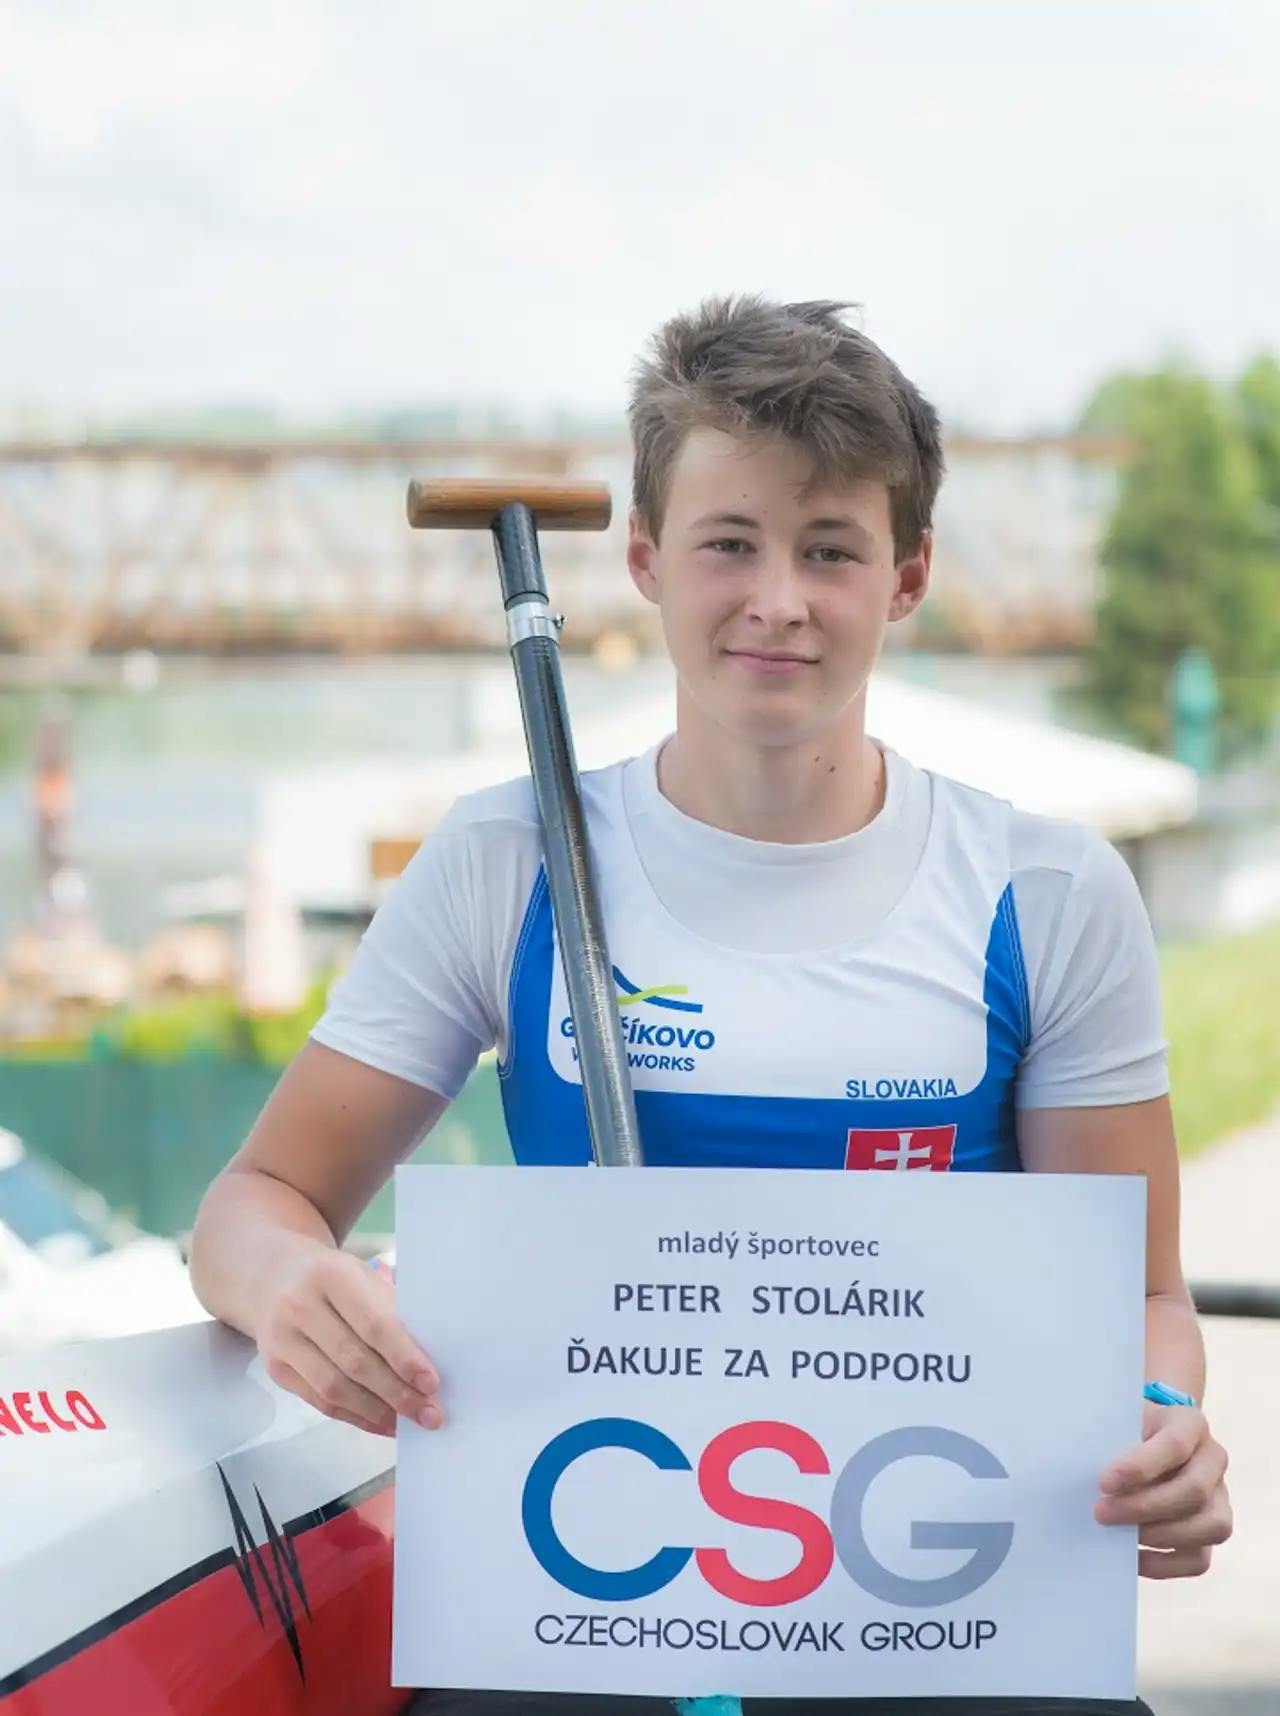 Mr. Peter Stolárik from MSM Martin is also a coach of his 15 years old son Peter, a speed canoeist, who is a member of the Slovak national cadet team. Thanks to sponsorship, Peter can buy a new boat.